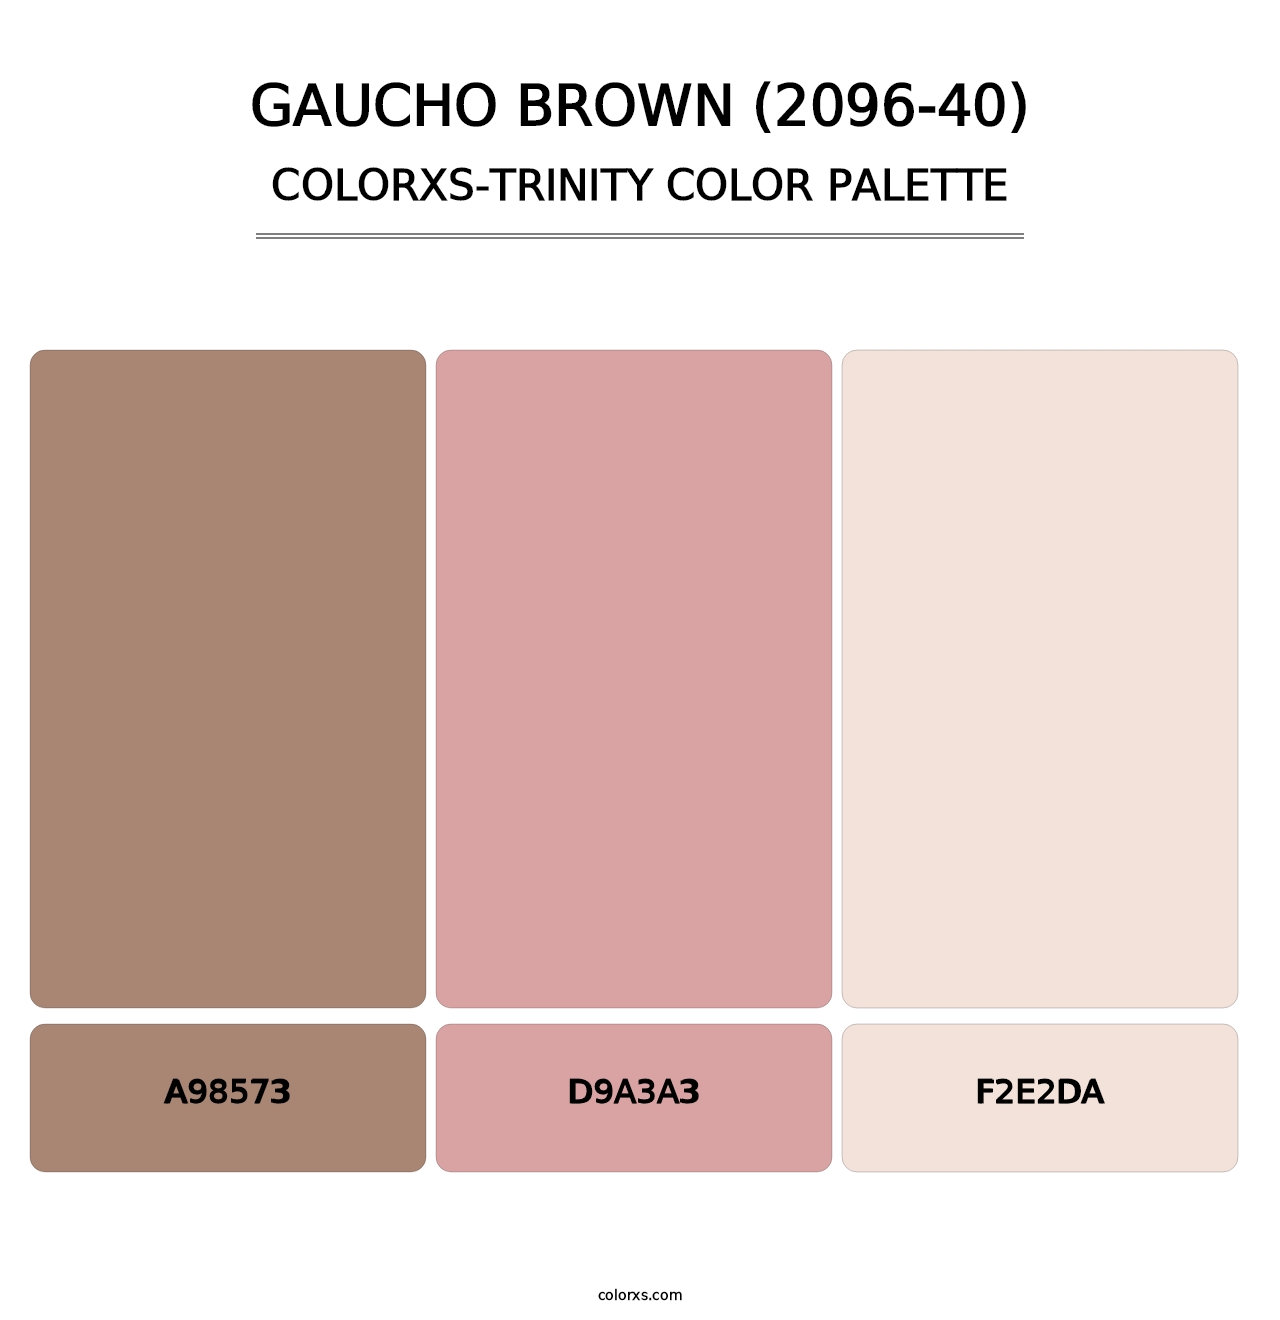 Gaucho Brown (2096-40) - Colorxs Trinity Palette